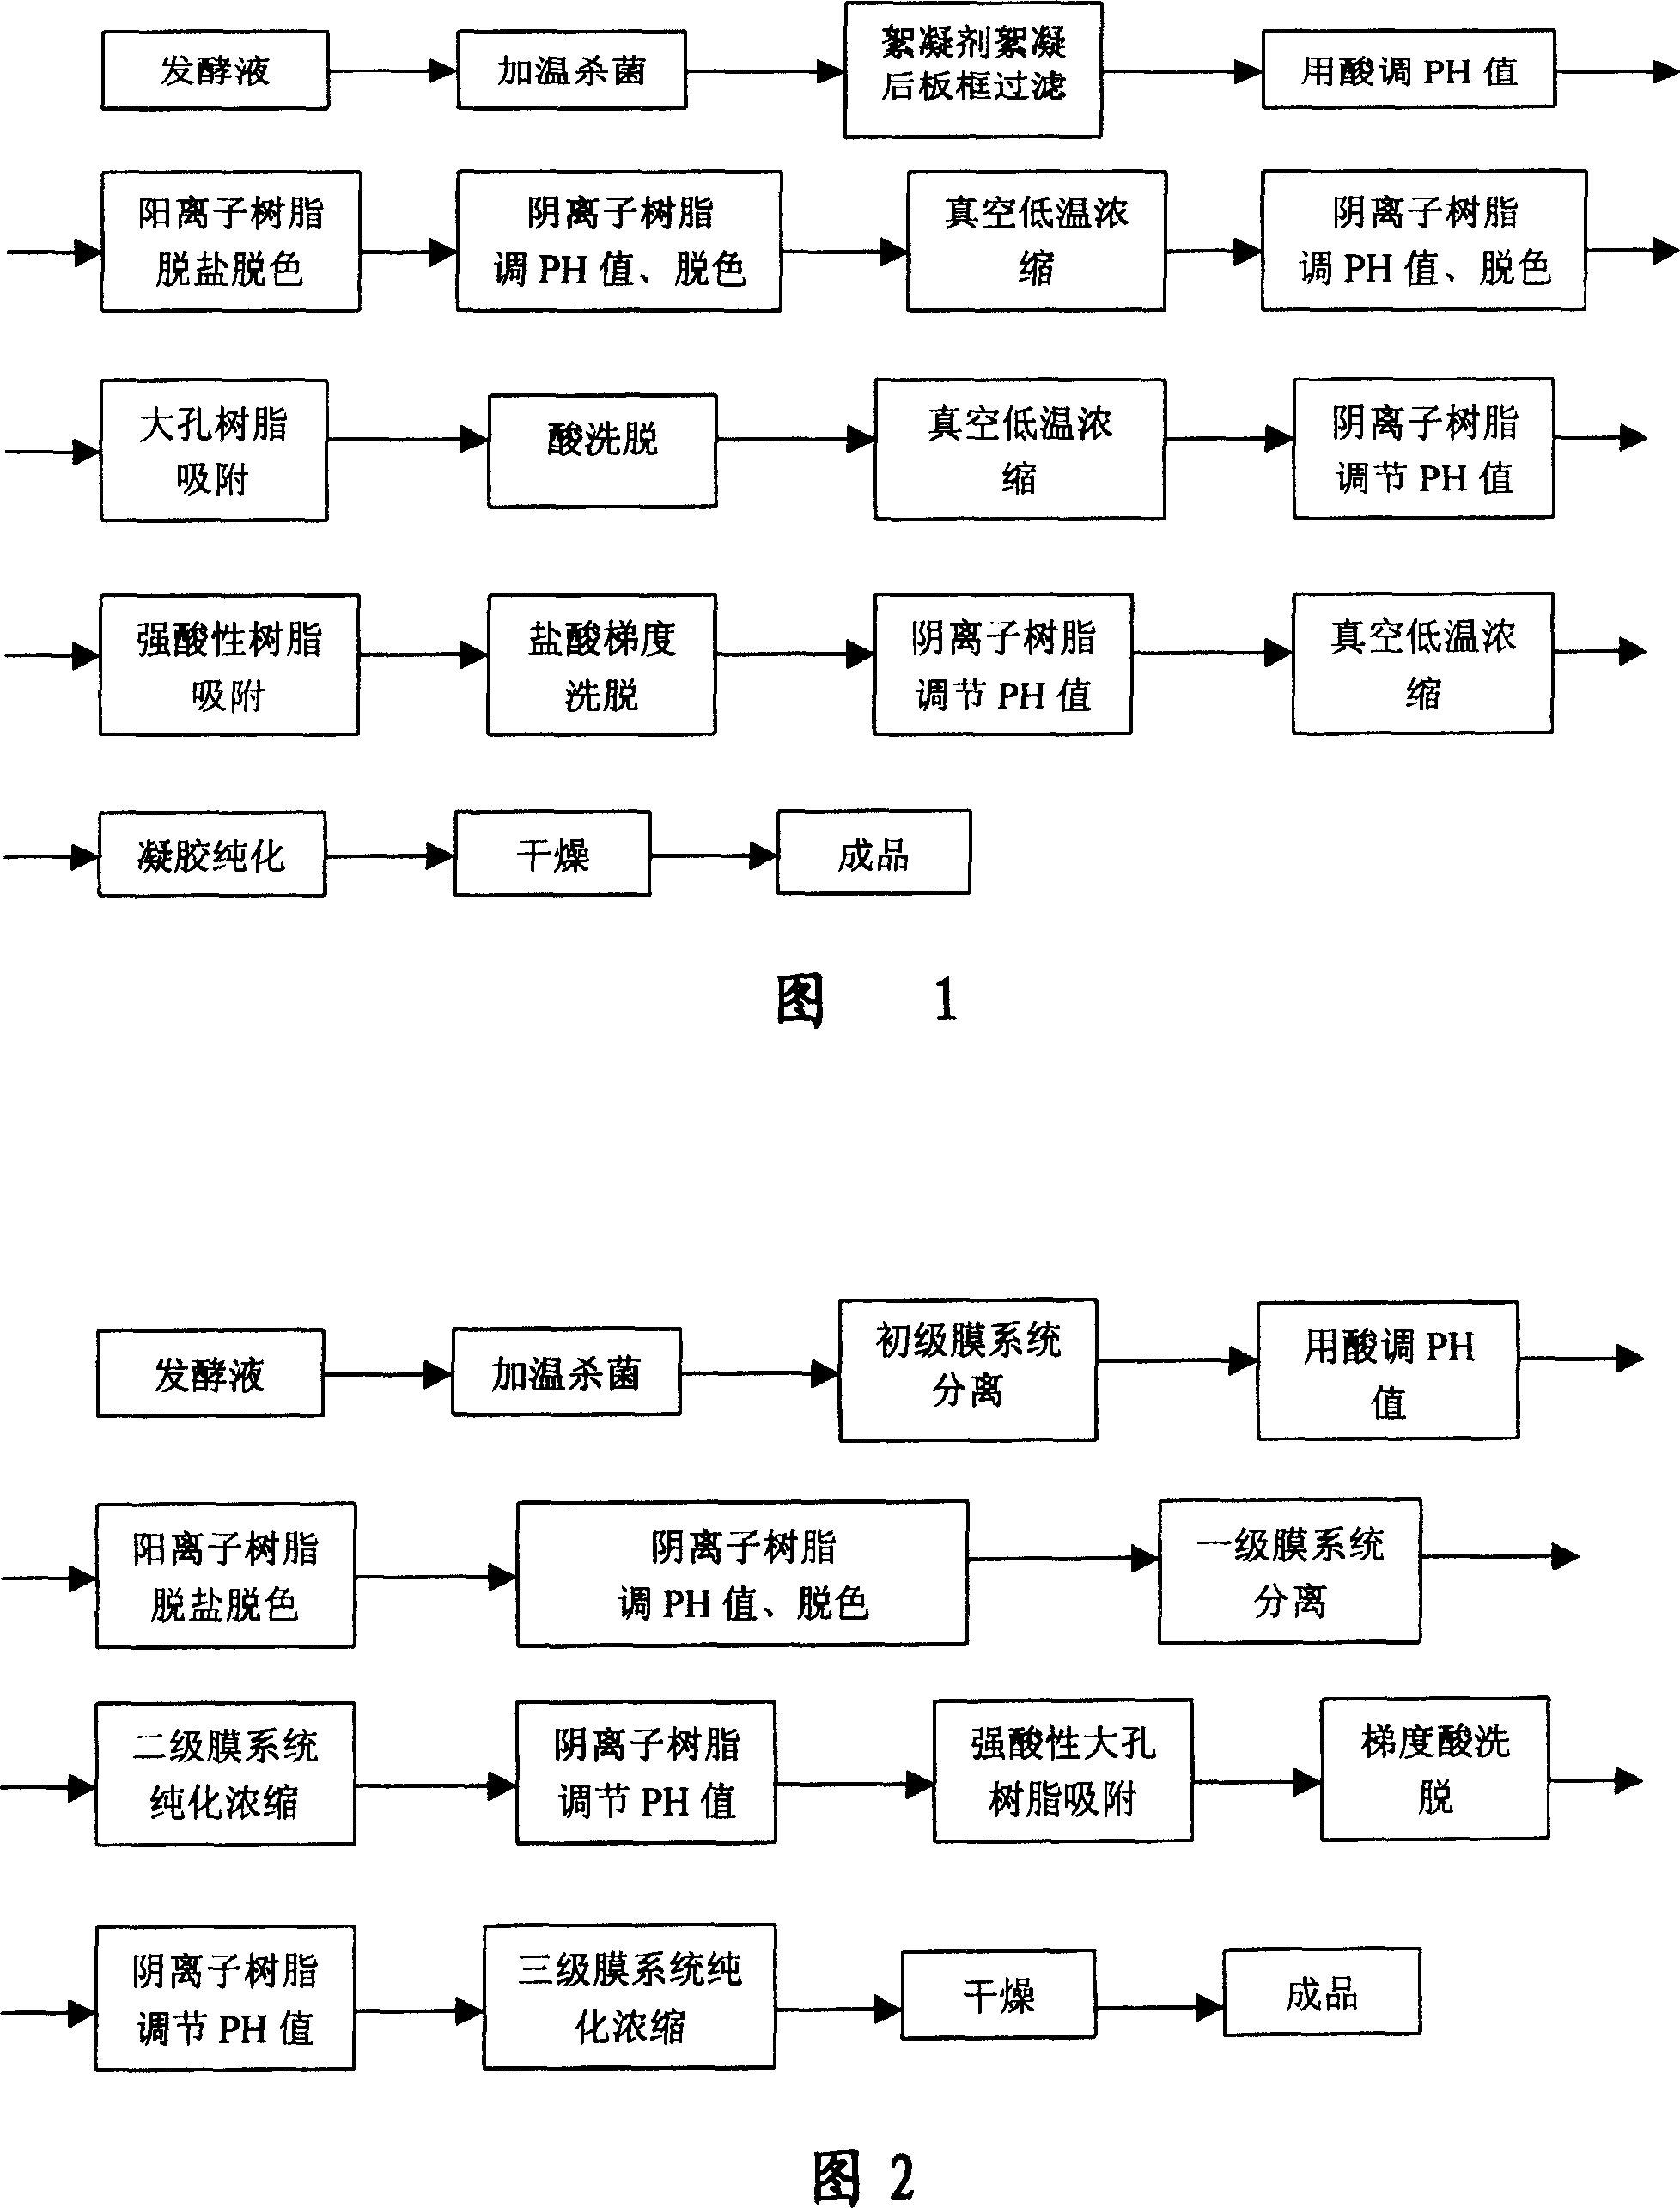 Process for preparing high purity acarbose